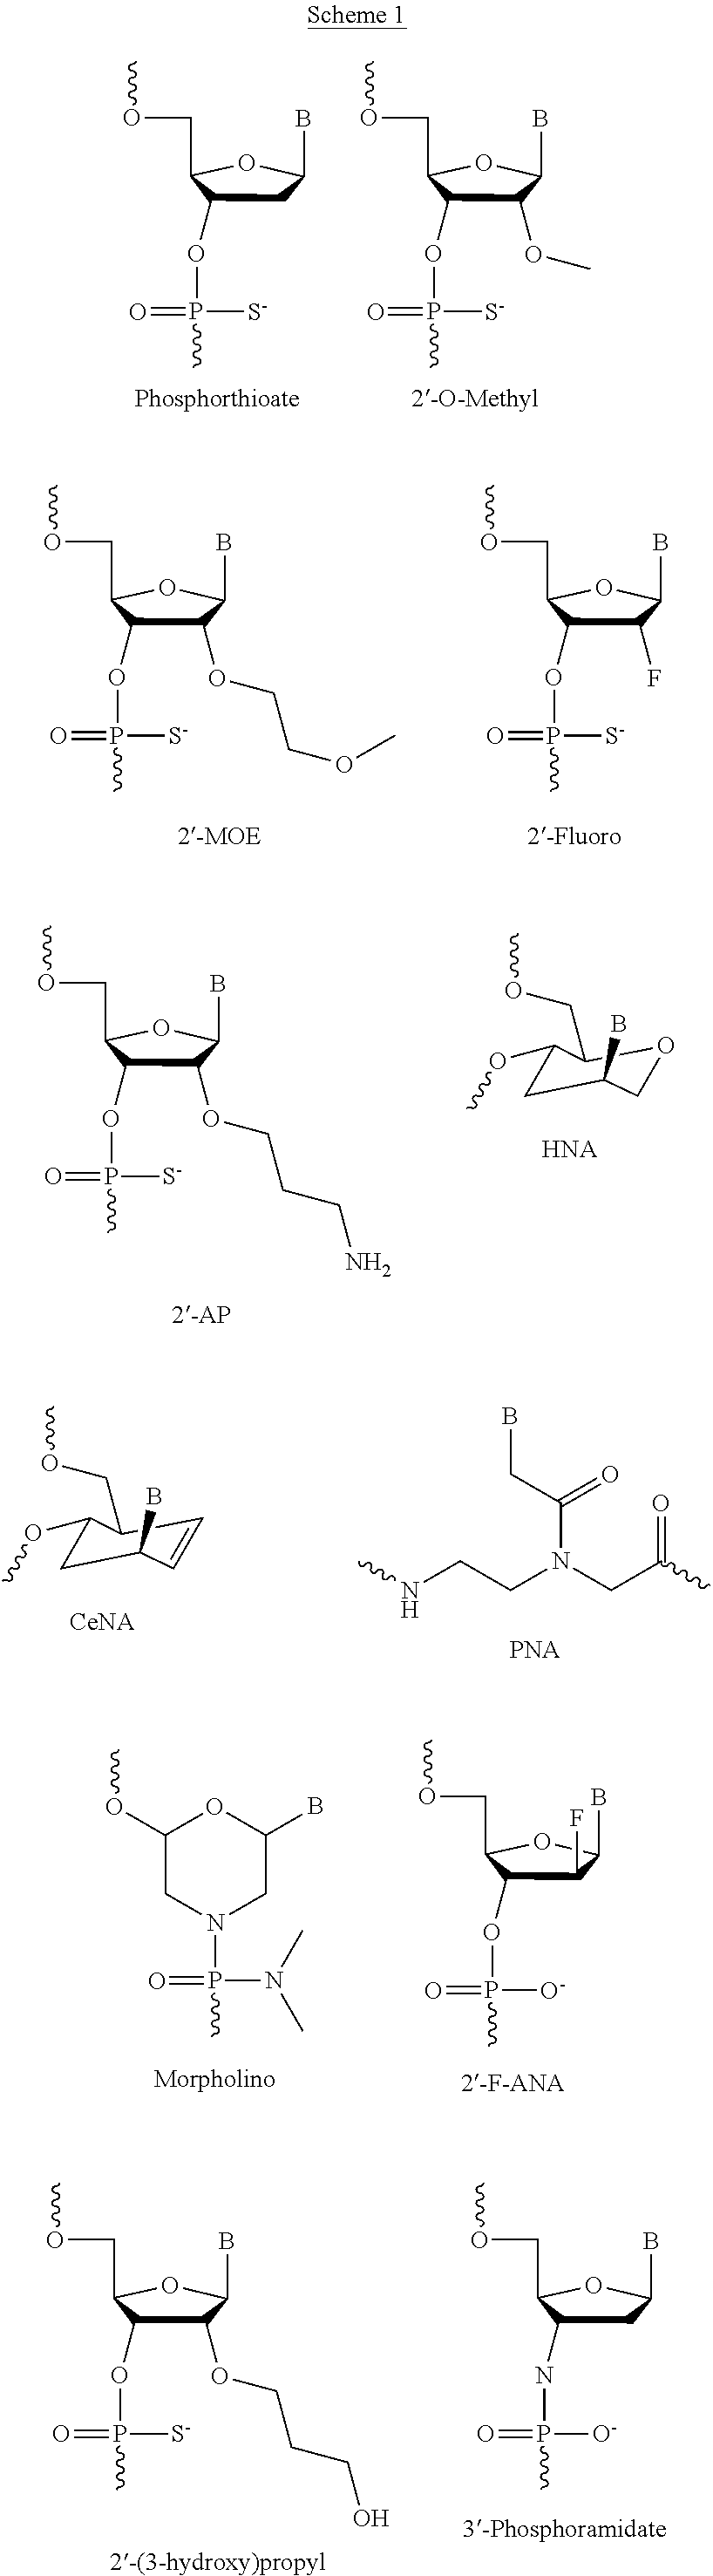 Compounds for the modulation of smn2 splicing